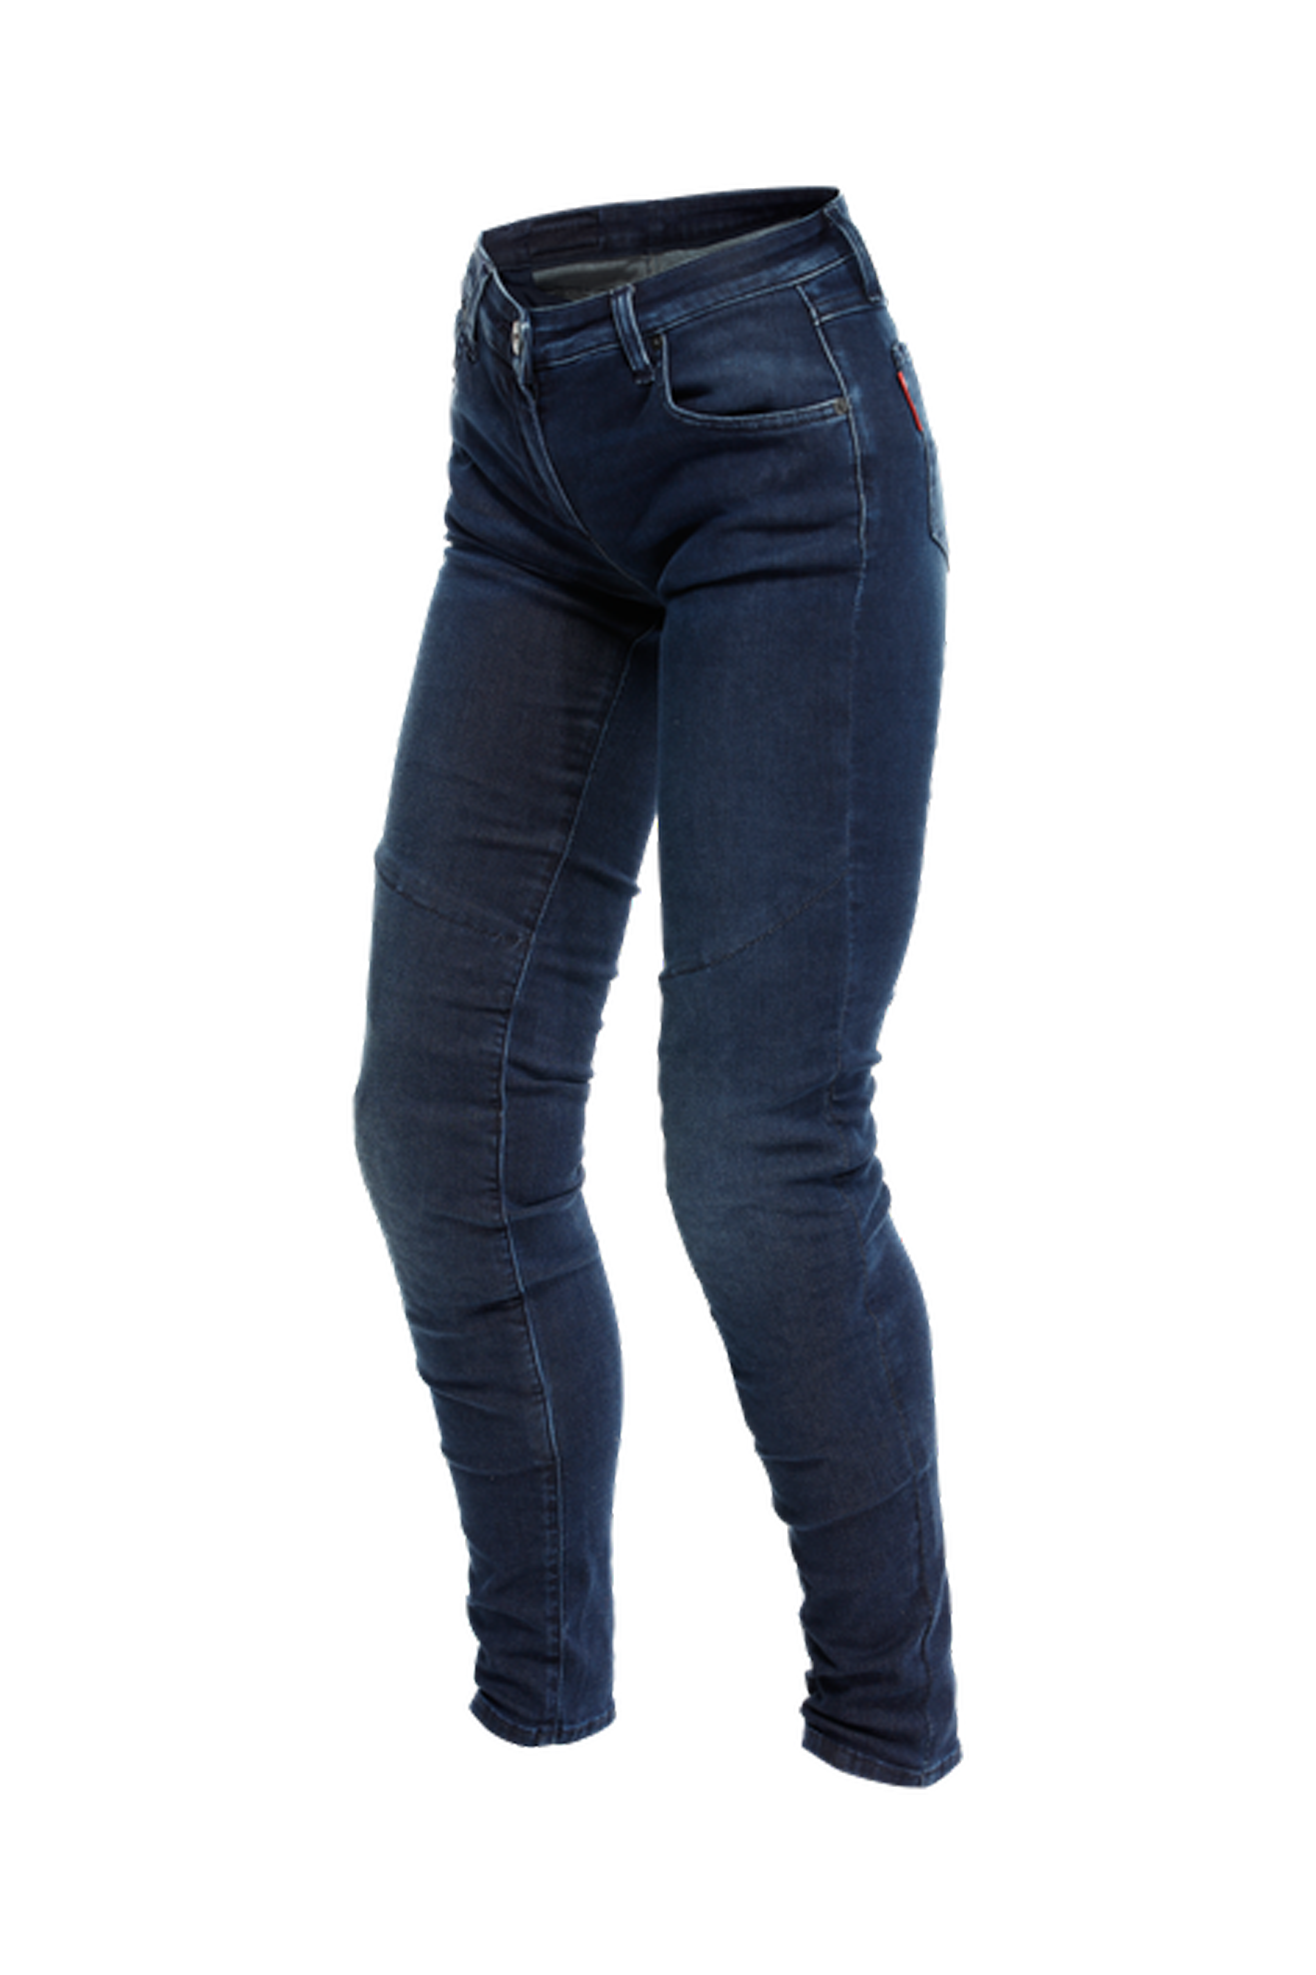 Dainese Jeans Moto Donna  Brushed Skinny Blu